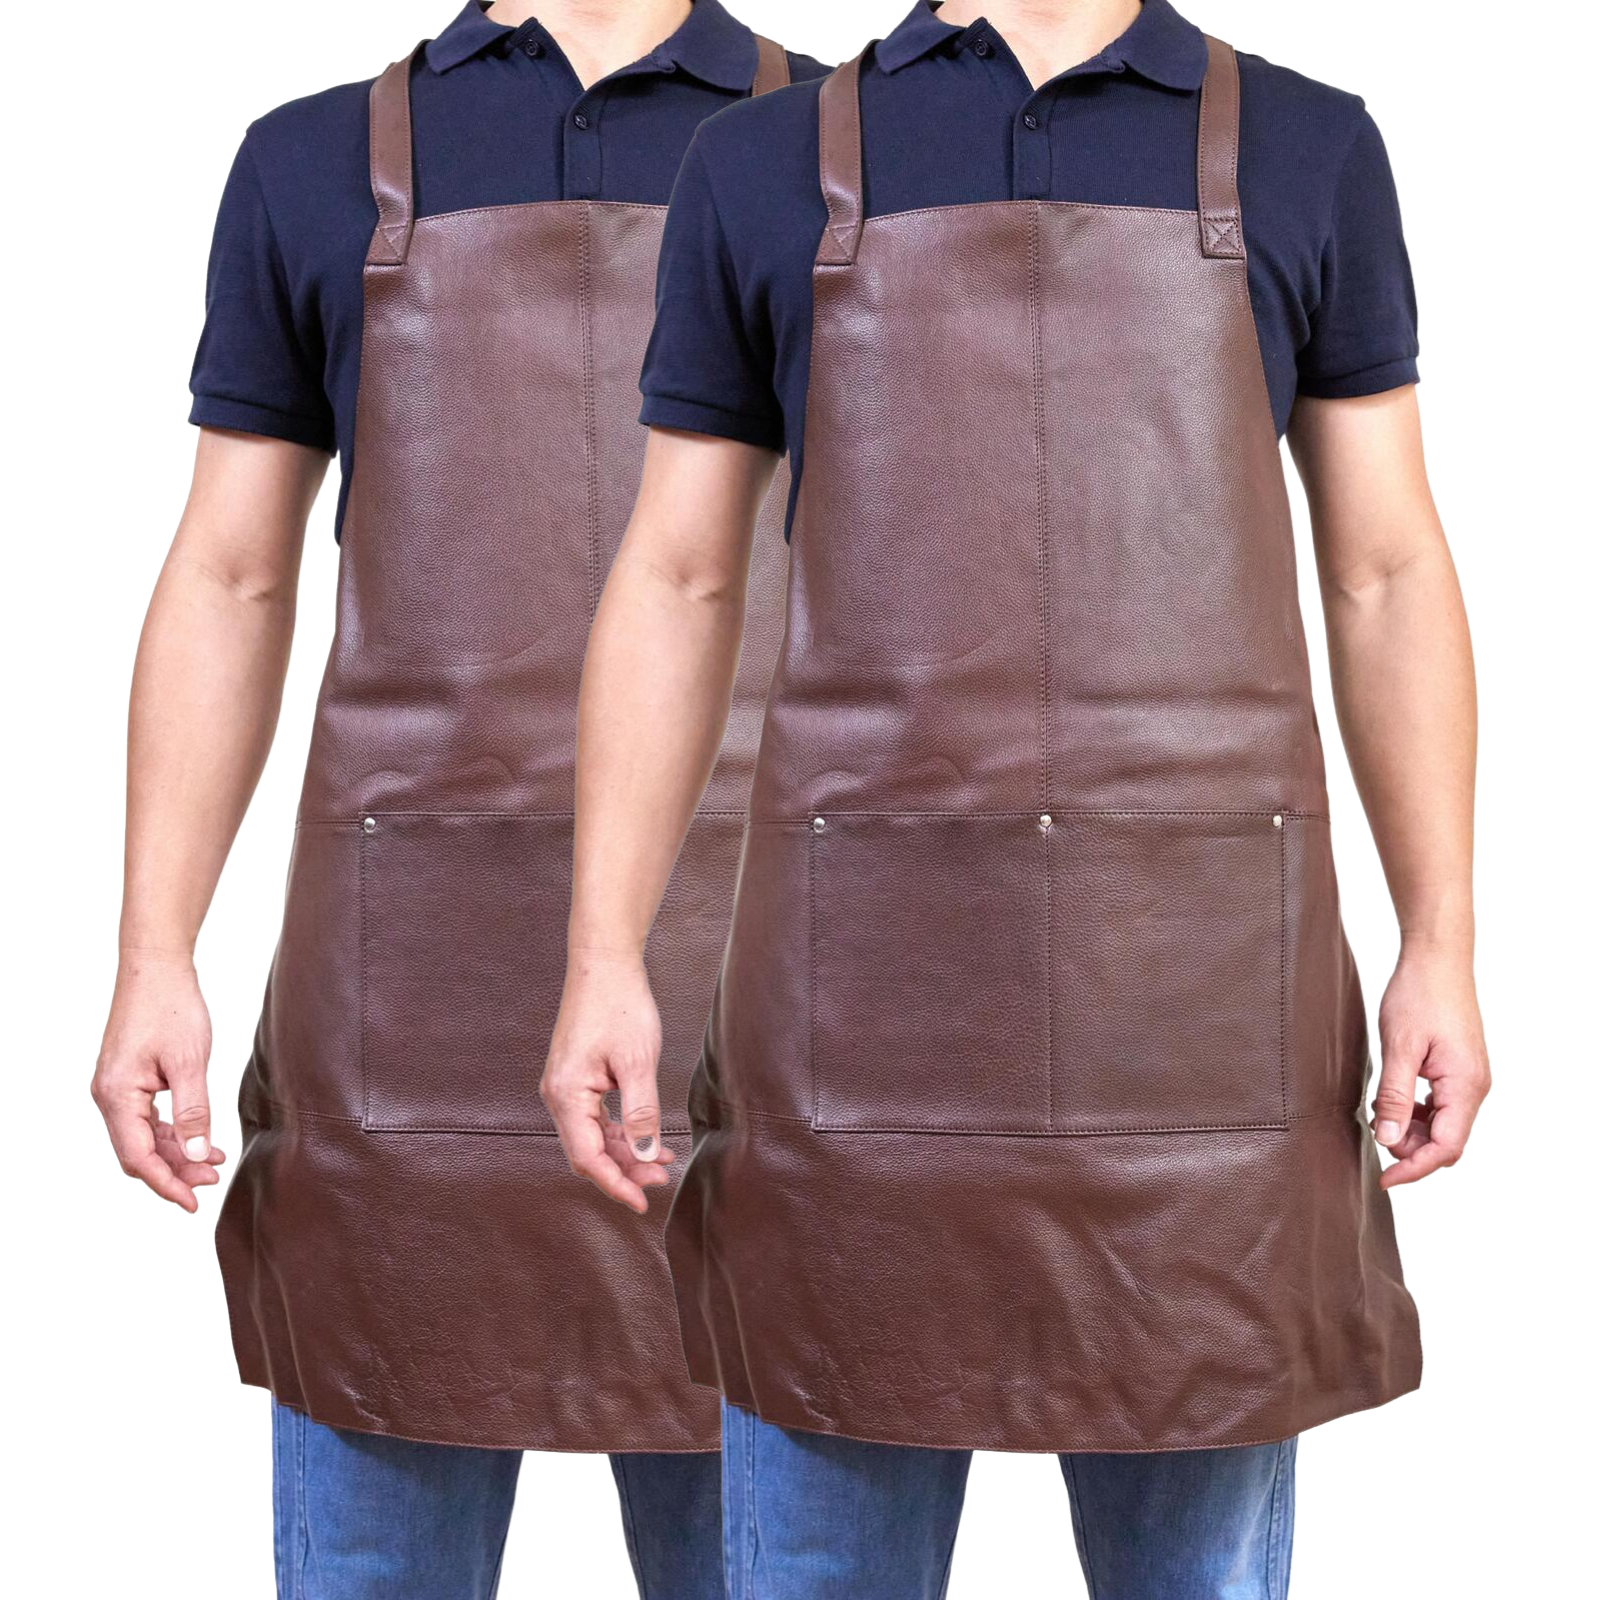 2x  Professional Leather Apron Butcher Woodwork Barber Chef - Brown